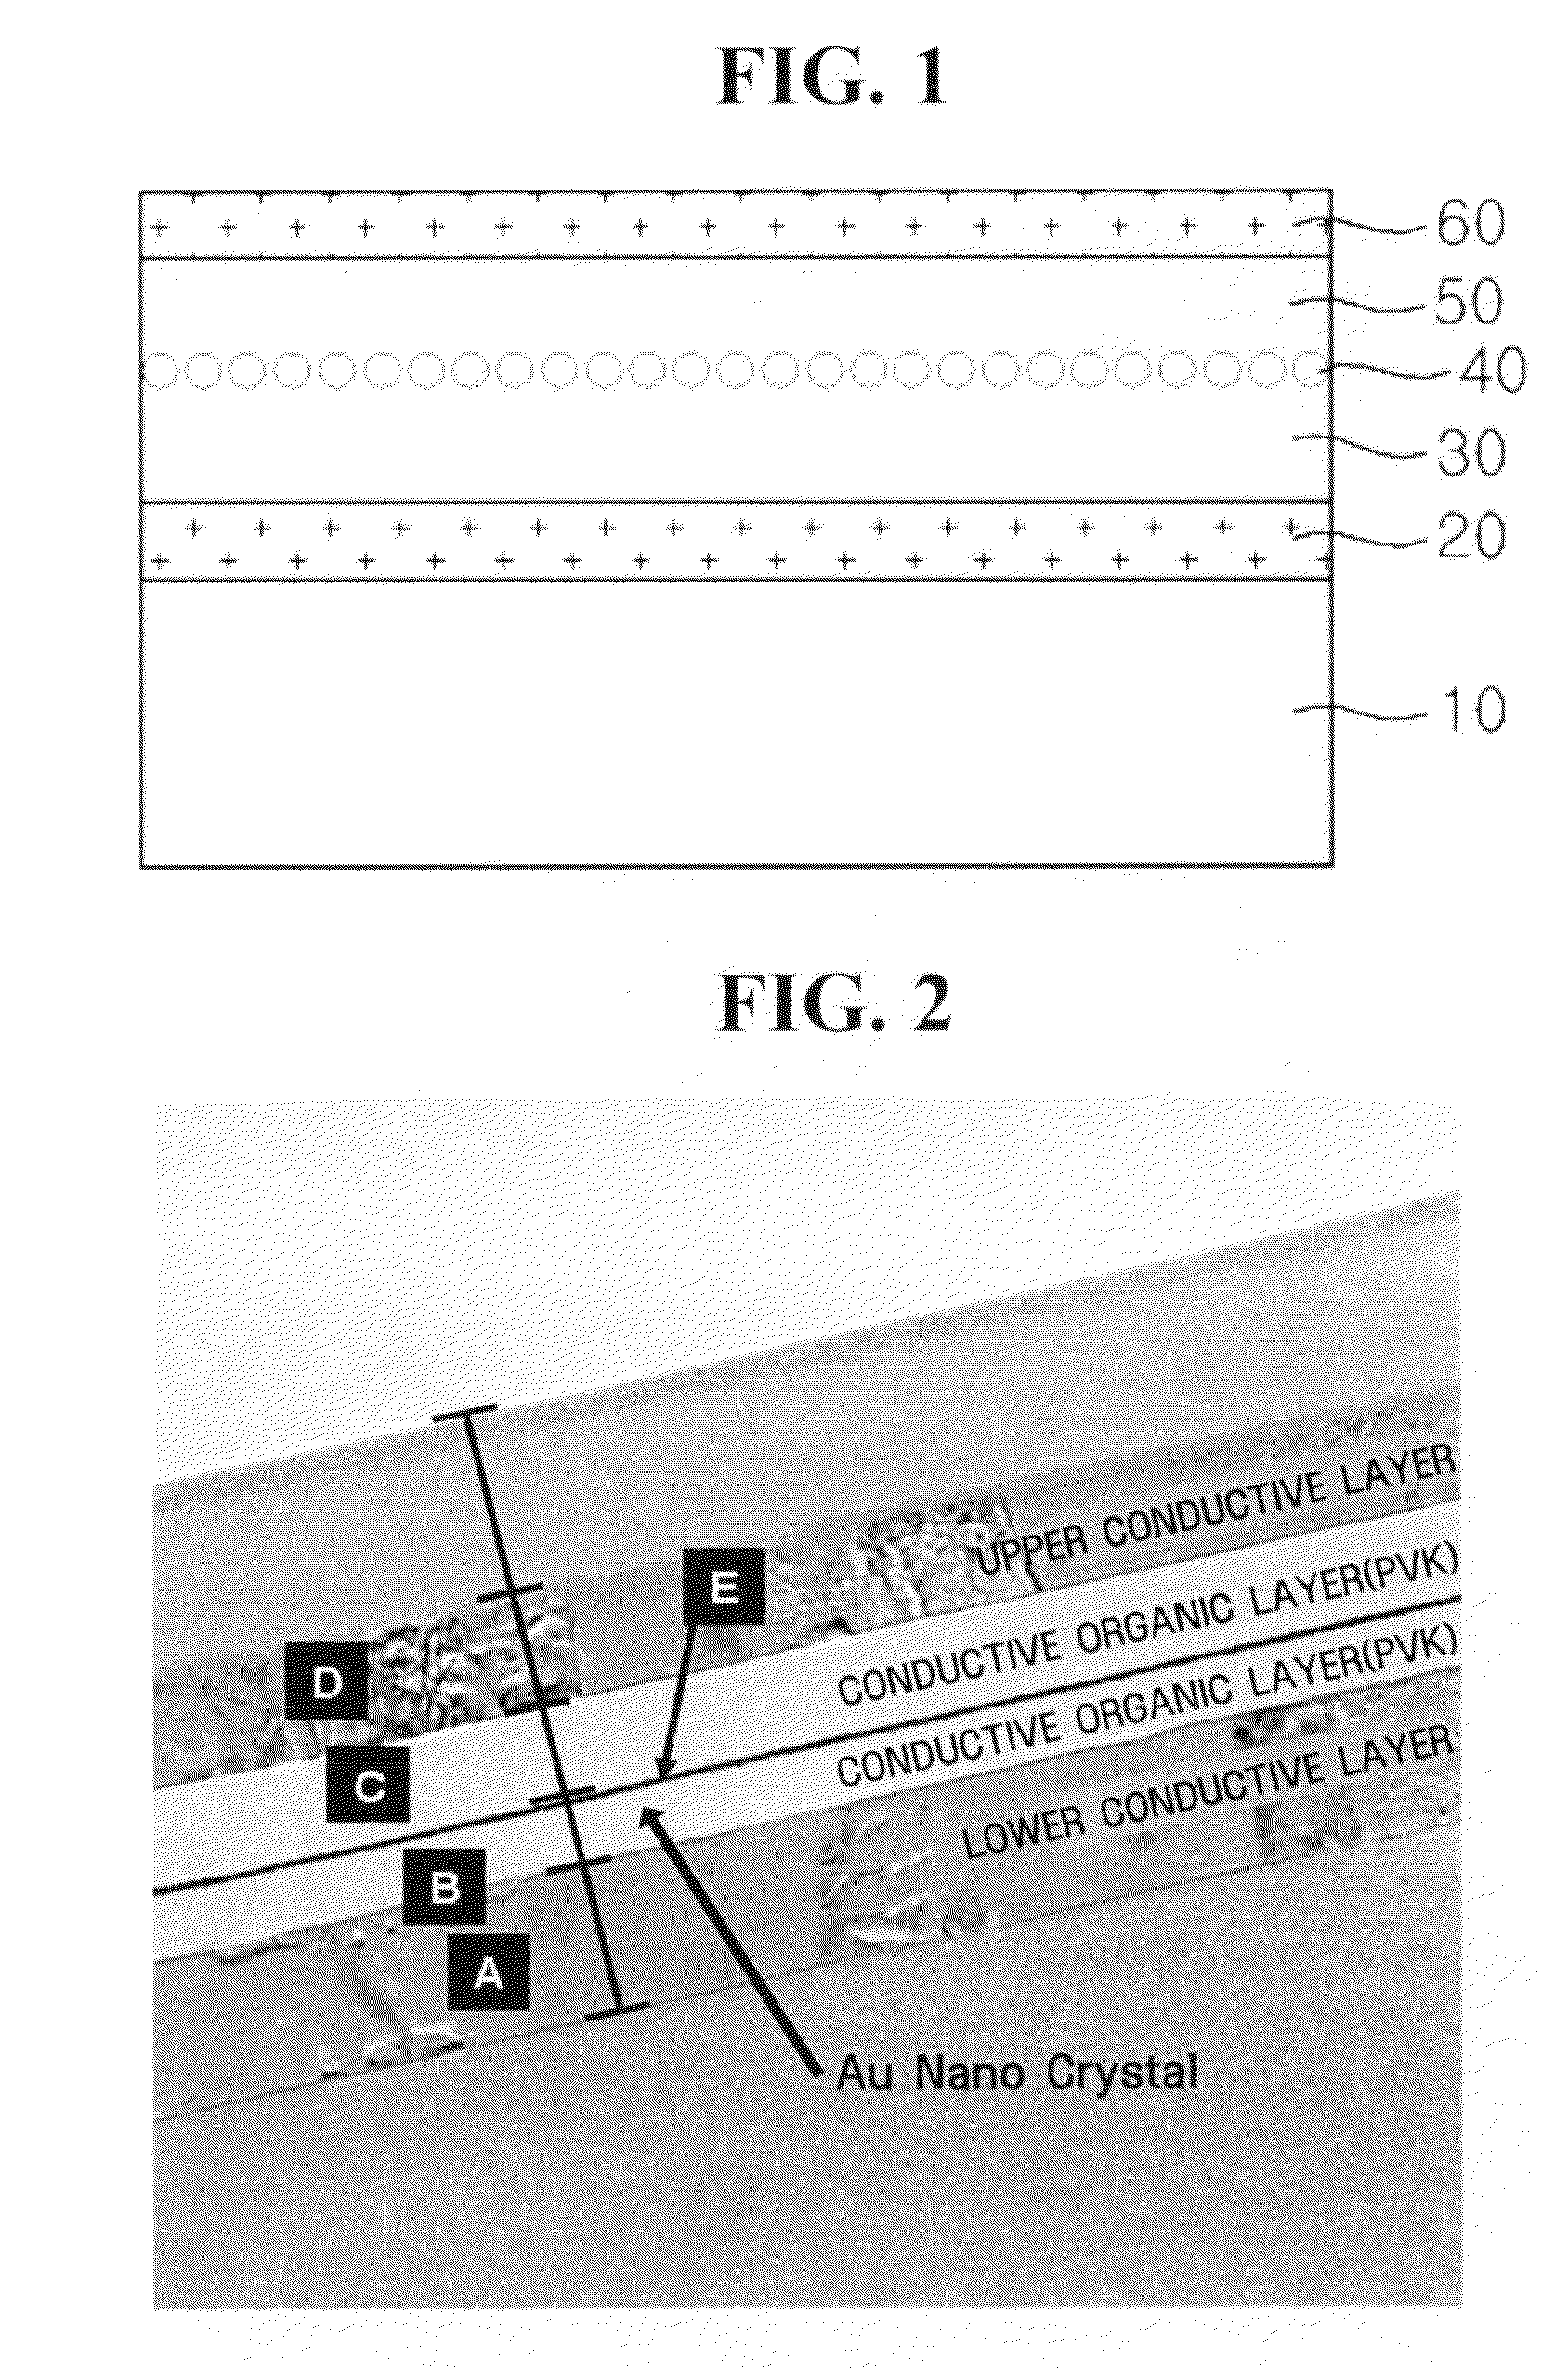 Method of manufacturing nonvolatile memory device using conductive organic polymer having nanocrystals embedded therein